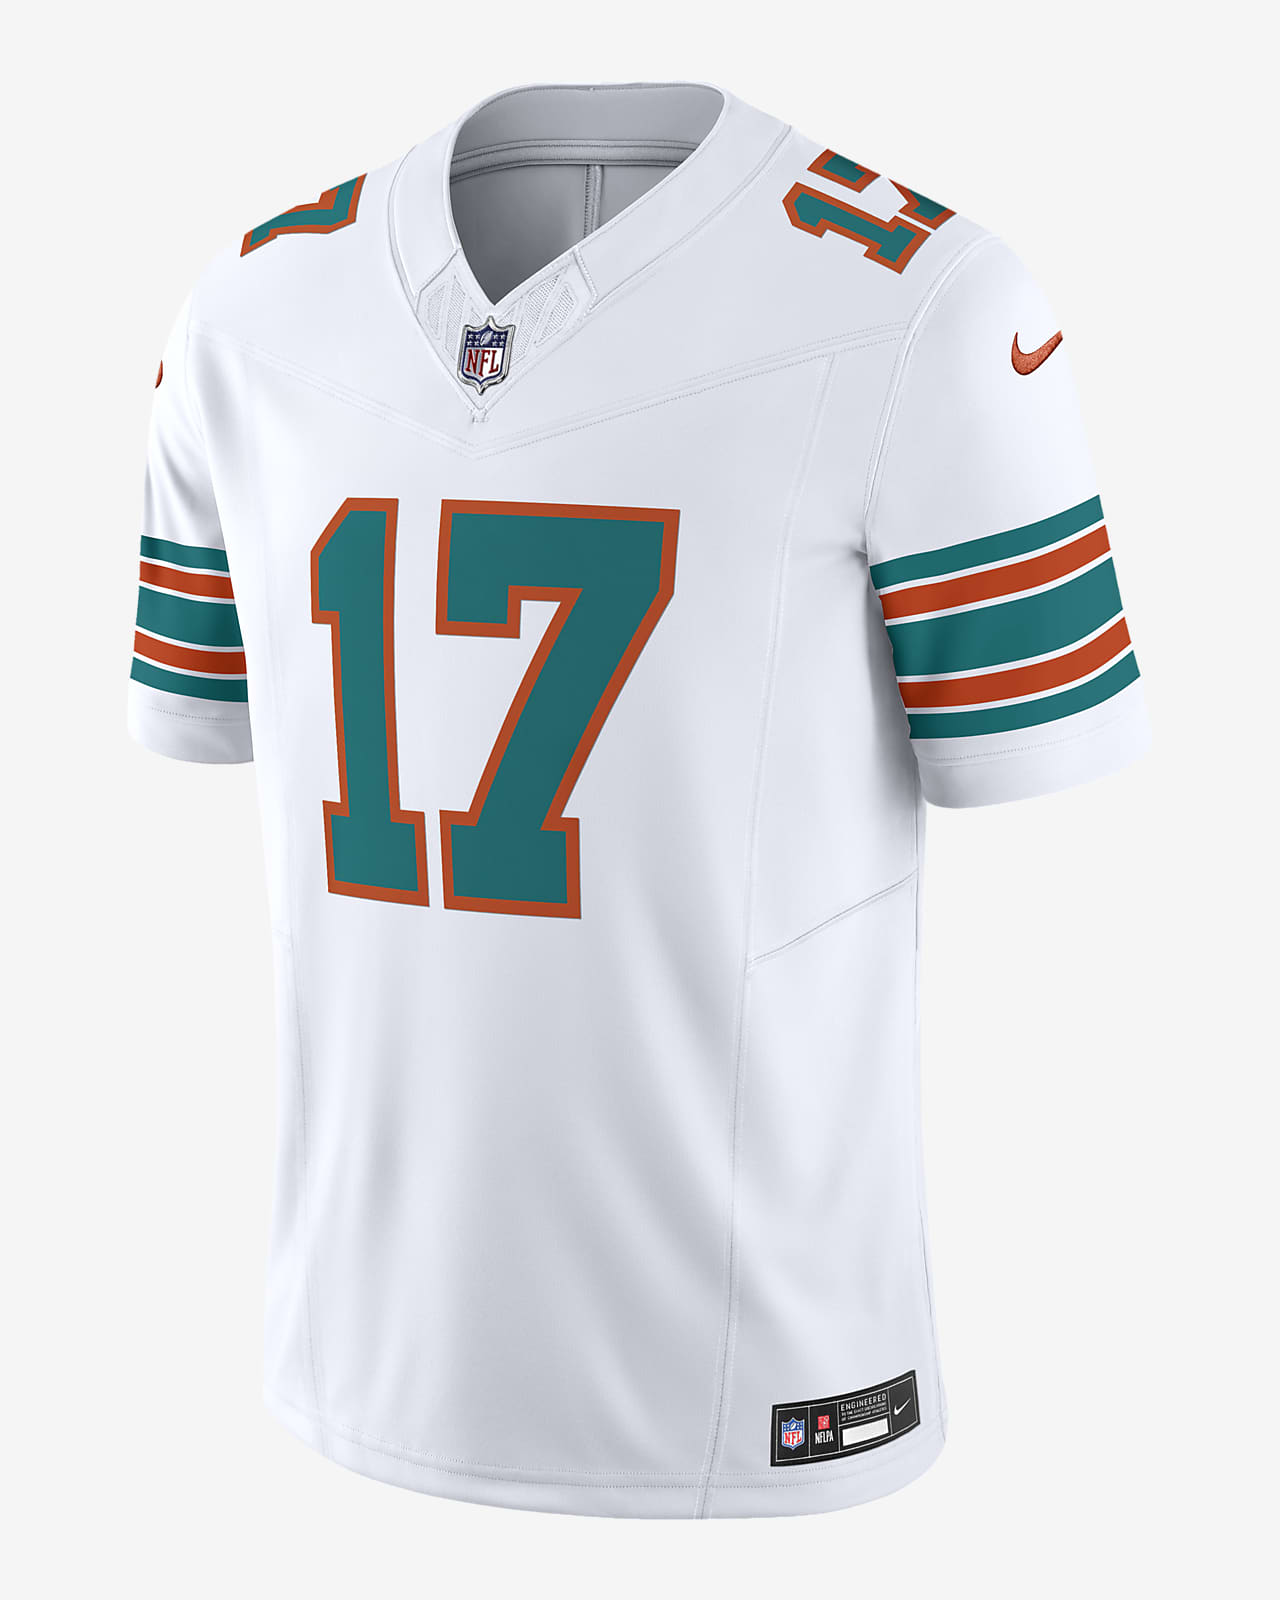 Jaylen Waddle Miami Dolphins Men's Nike Dri-FIT NFL Limited Football Jersey